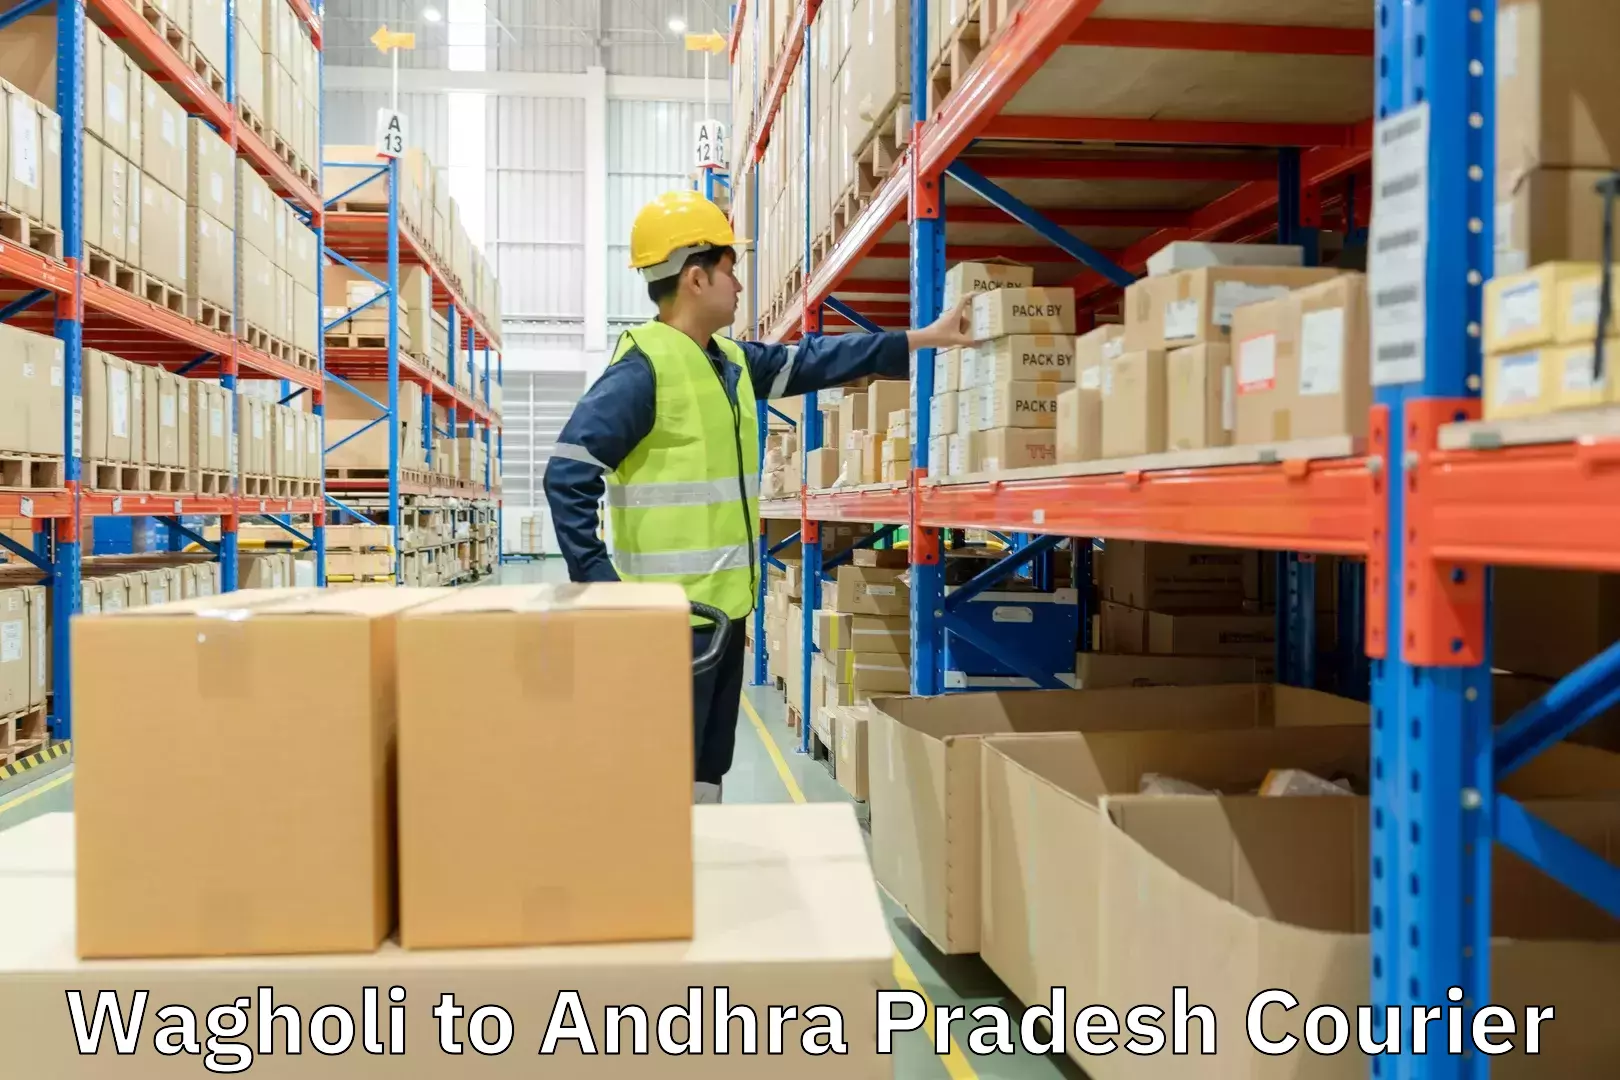 State-of-the-art courier technology Wagholi to Andhra Pradesh